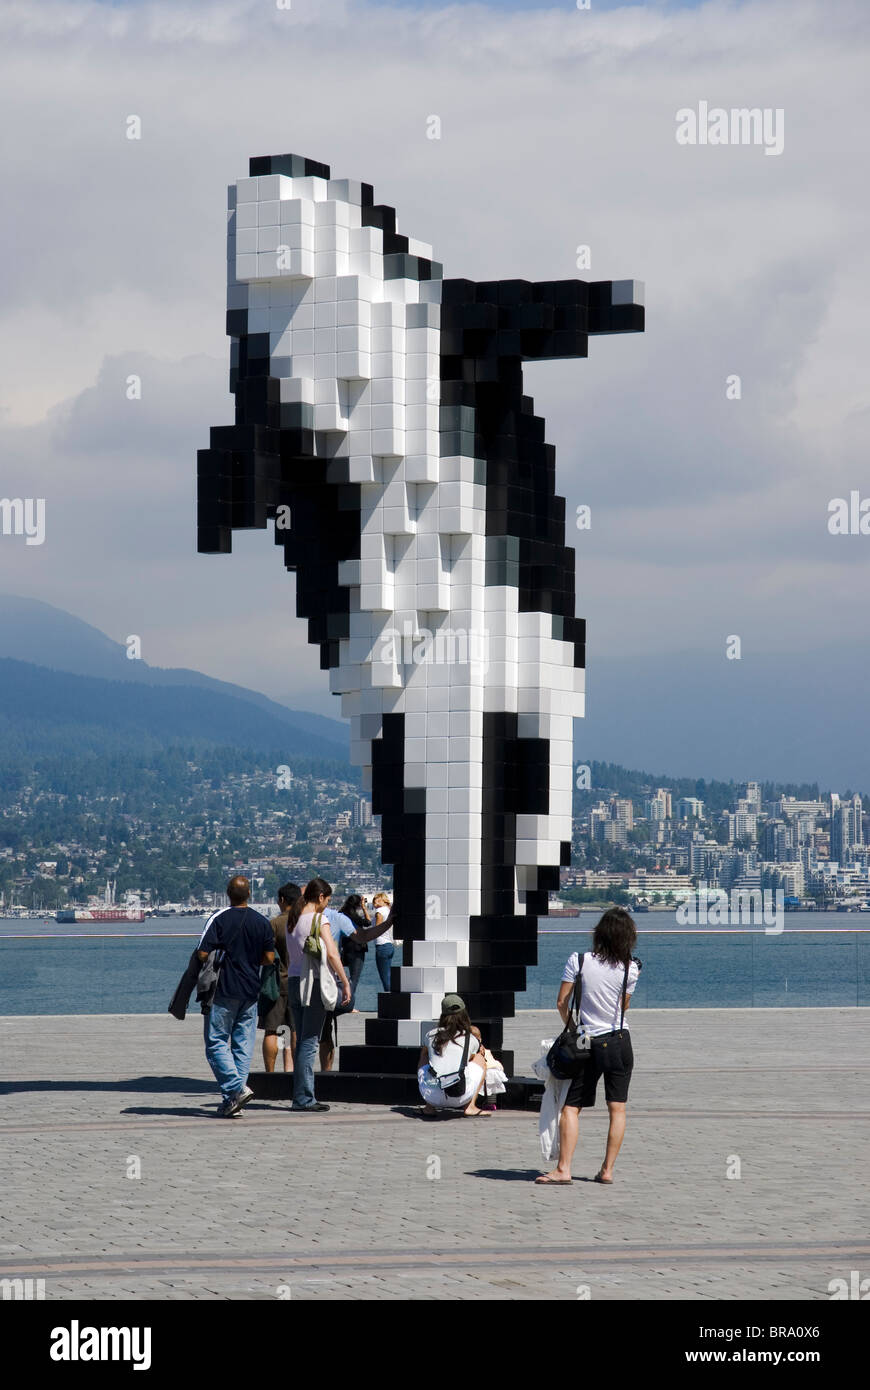 'Pixel Orca', sculpture by Douglas Coupland outside the Vancouver Convention Centre Stock Photo